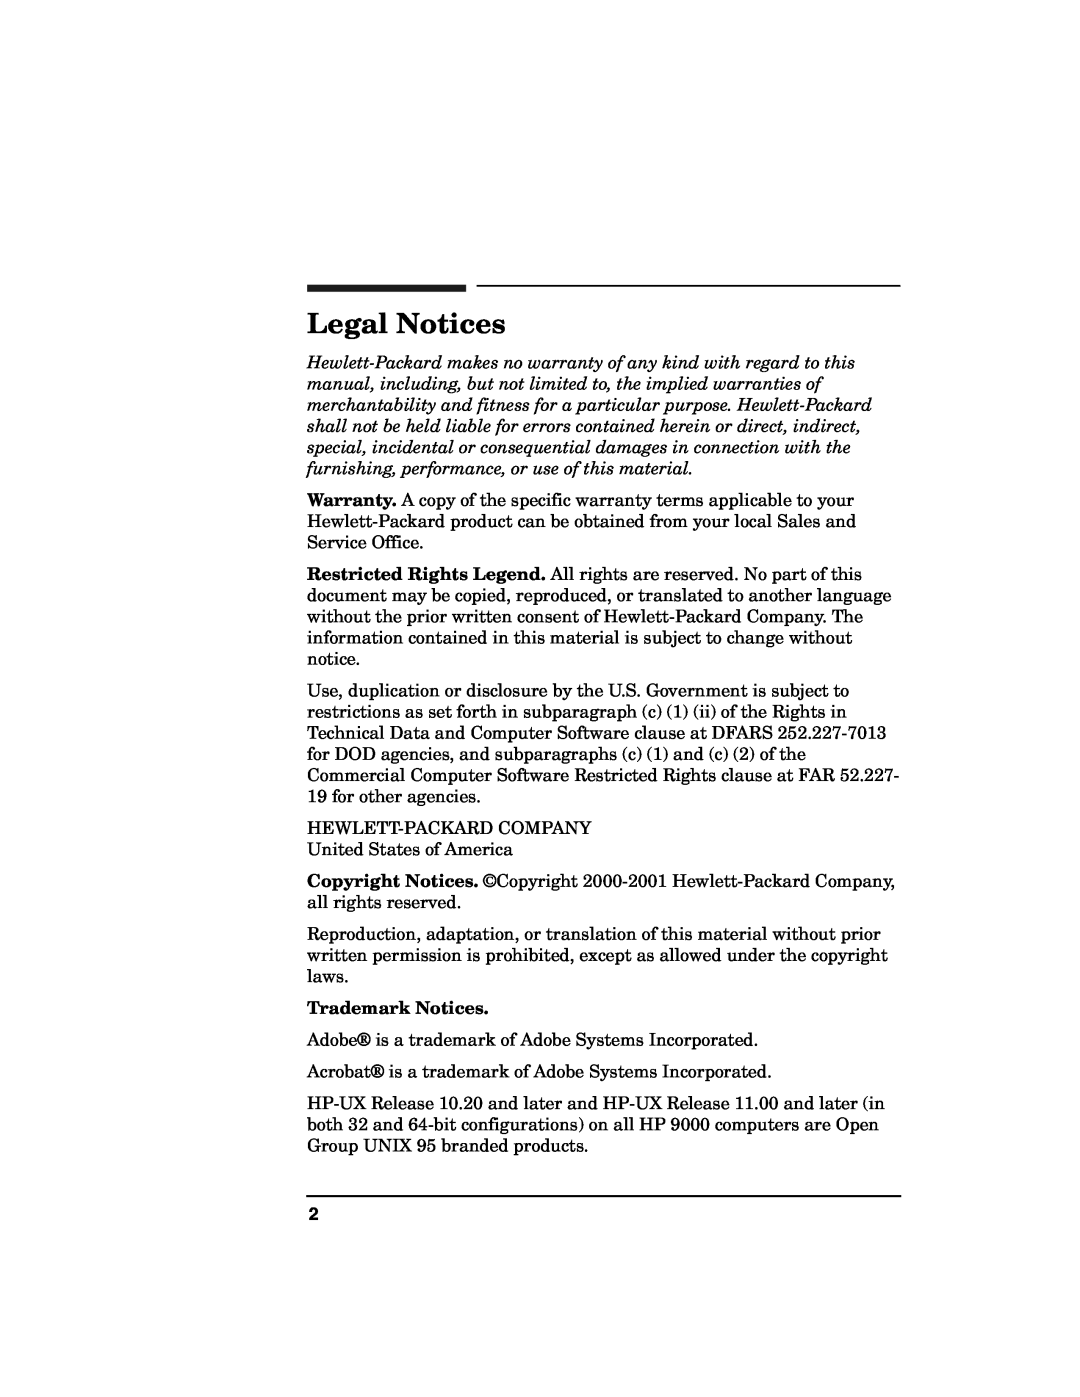 HP OPENVIEW J5119-90007 manual Legal Notices, Trademark Notices 